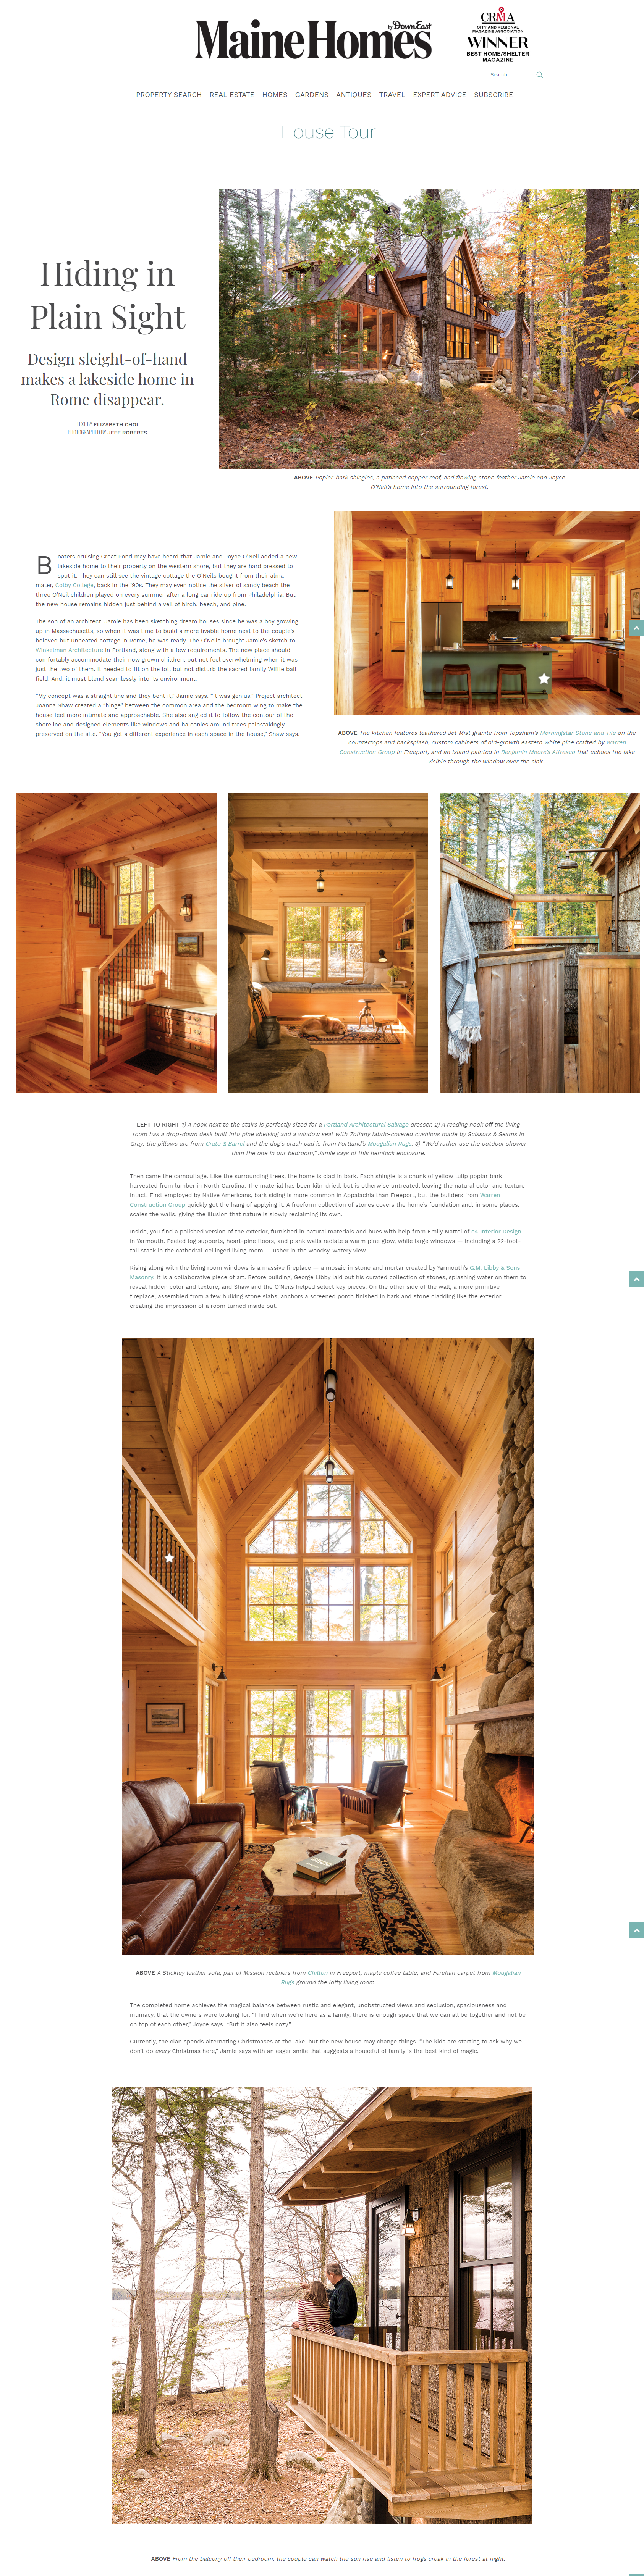 DownEast Magazine Rome House Article